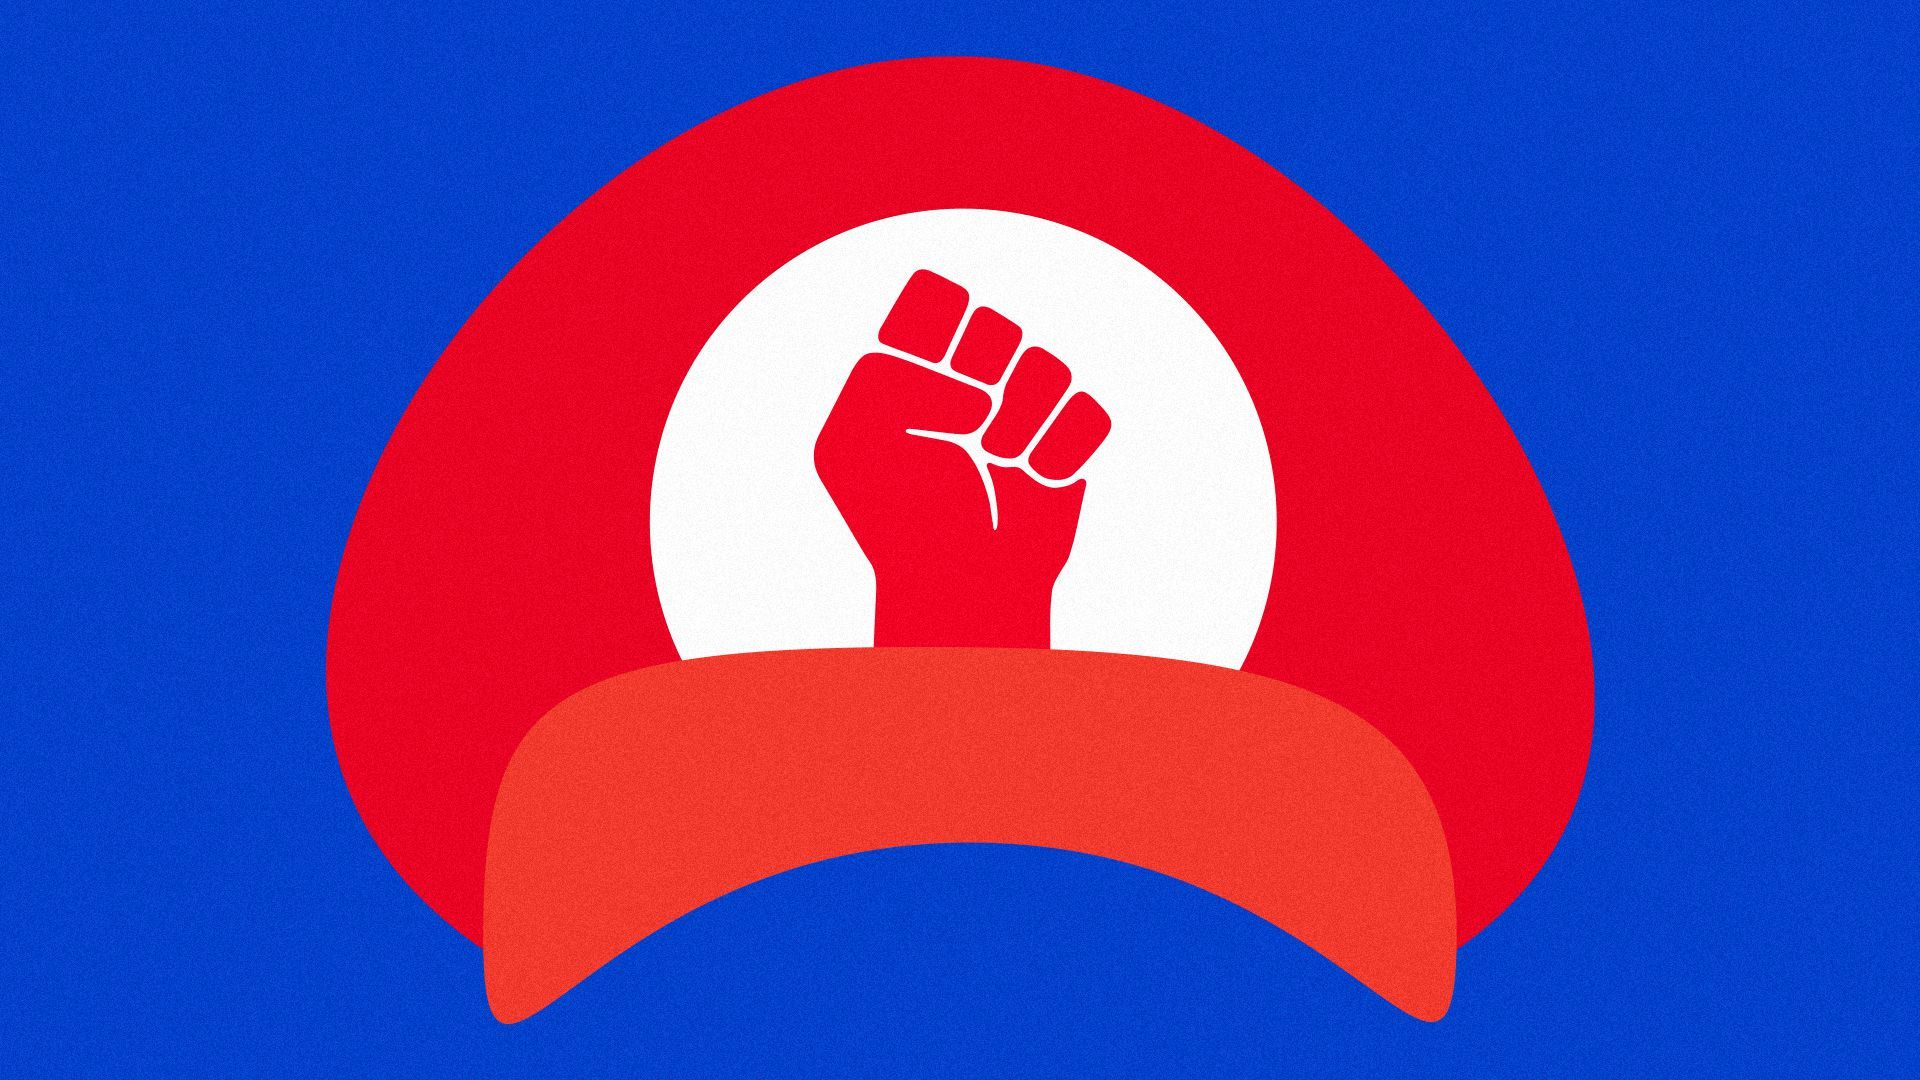 Illustration of Mario's hat with a fist instead of an "M".